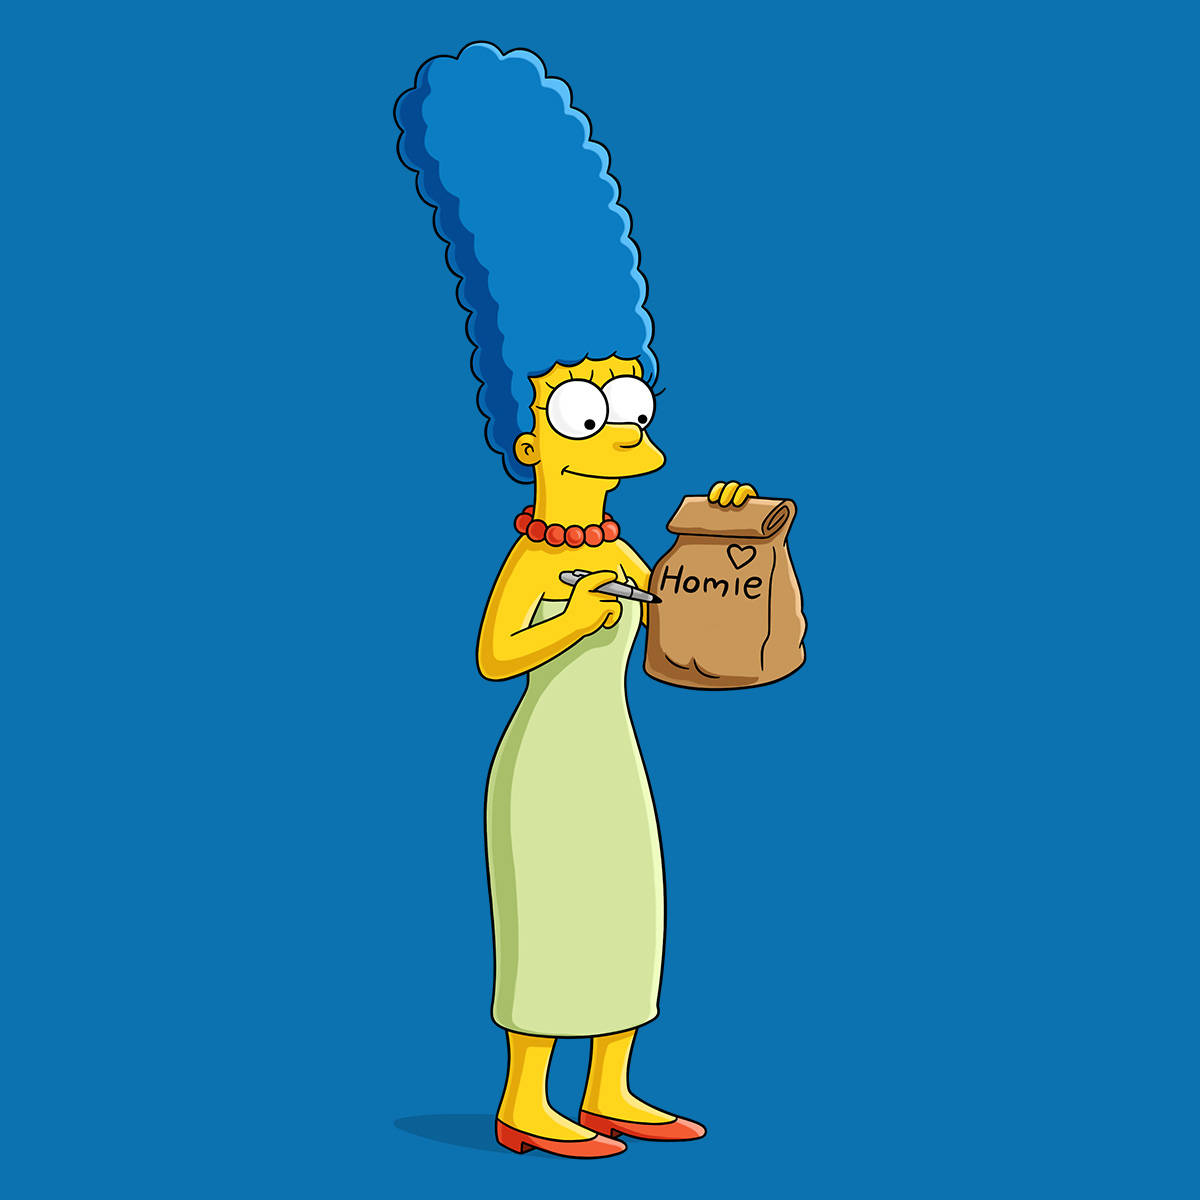 Marge Simpson Cartoon Character Wallpaper